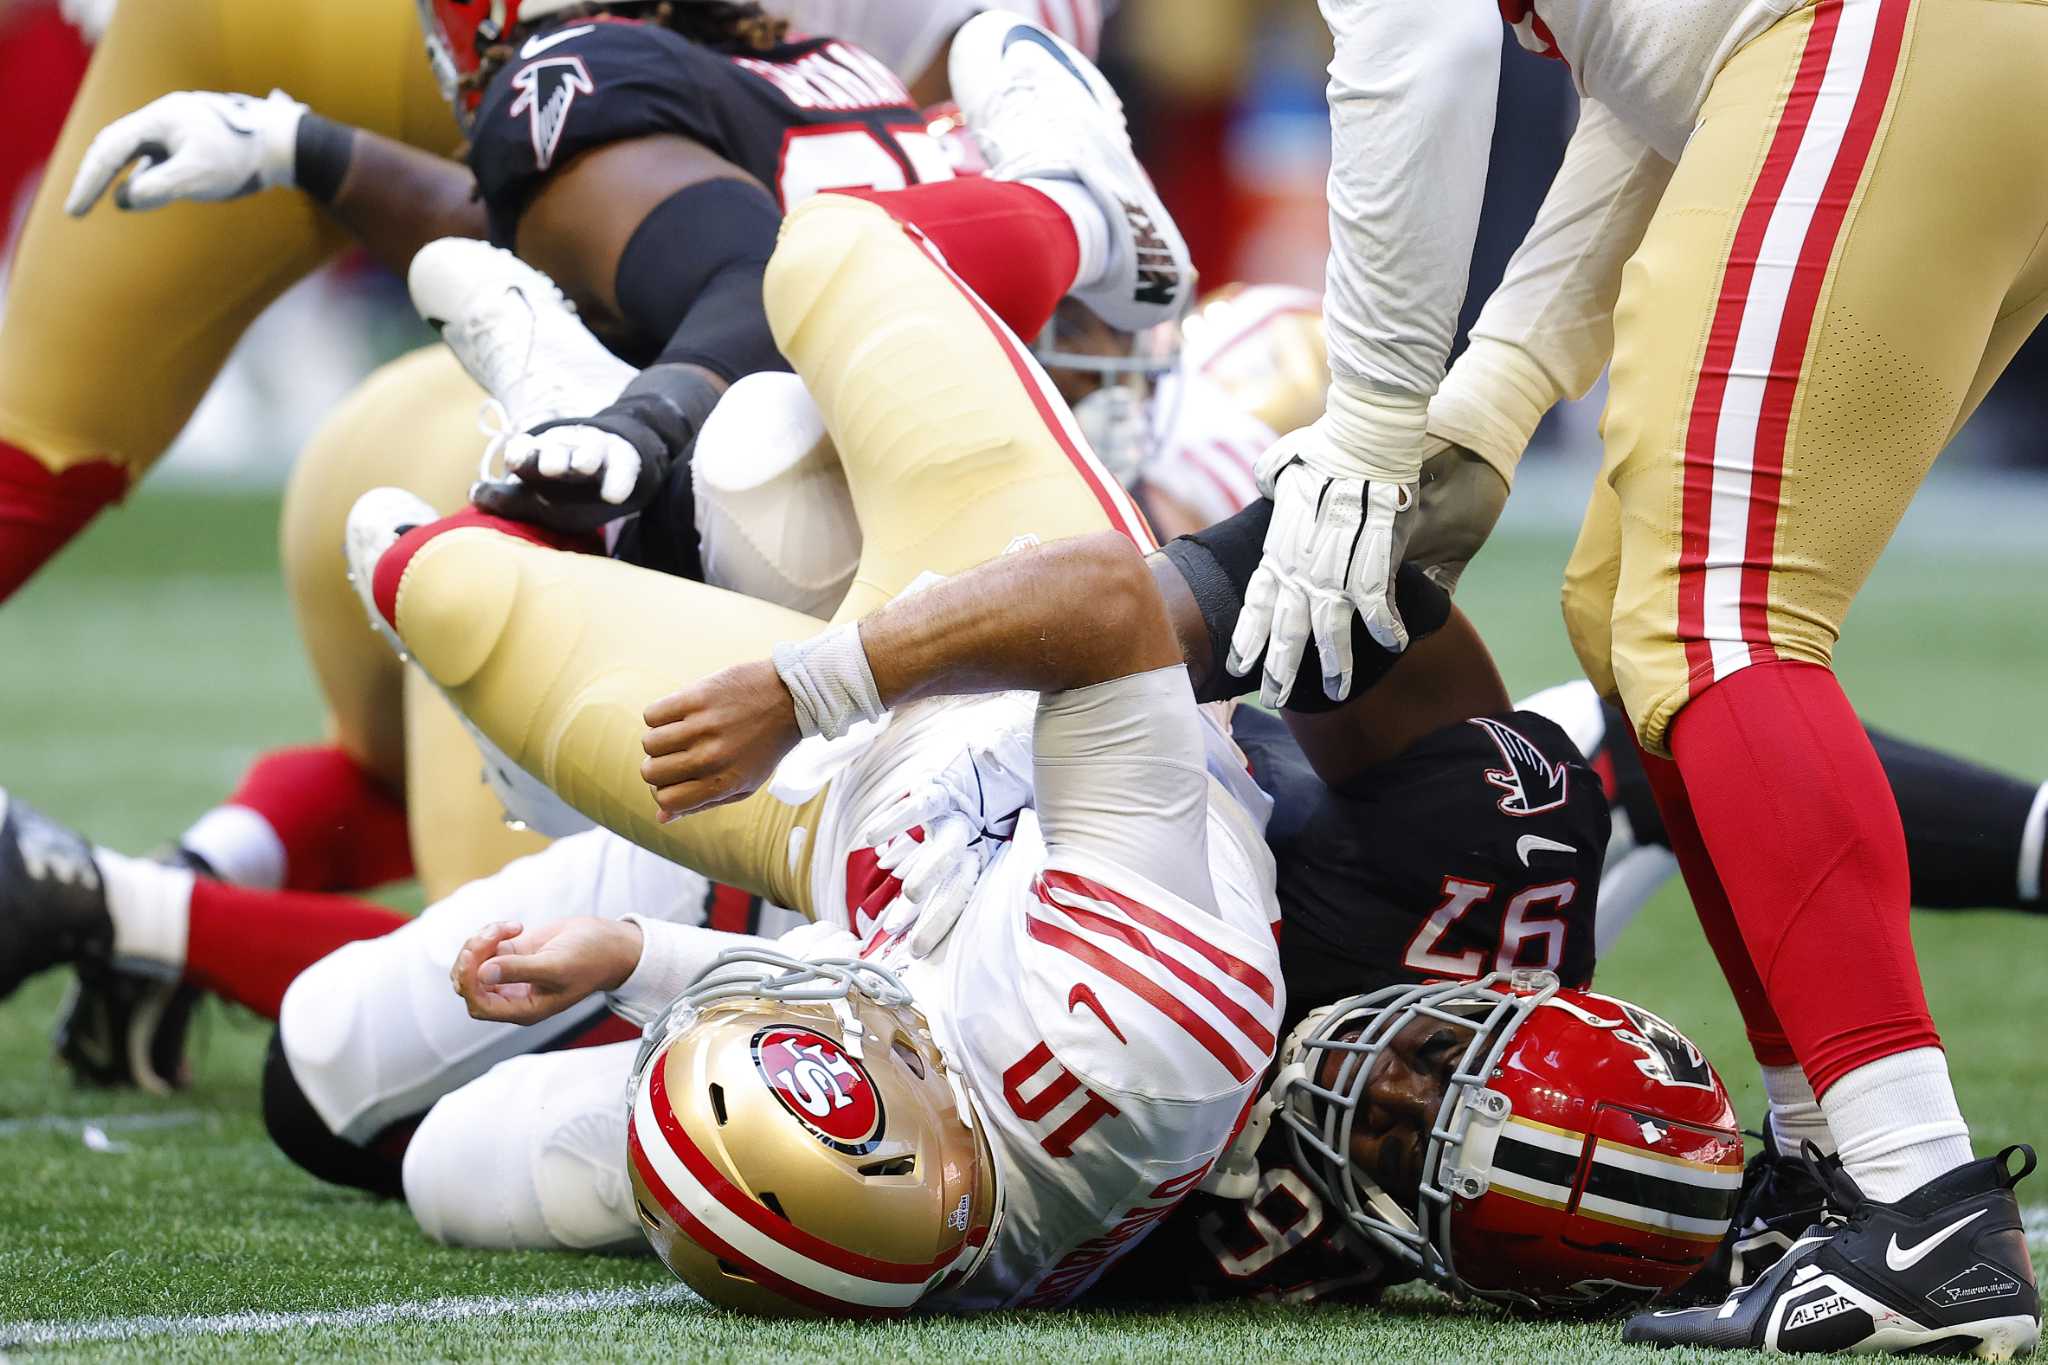 49ers-Falcons live blog: Battered Niners fall to Falcons 28-14